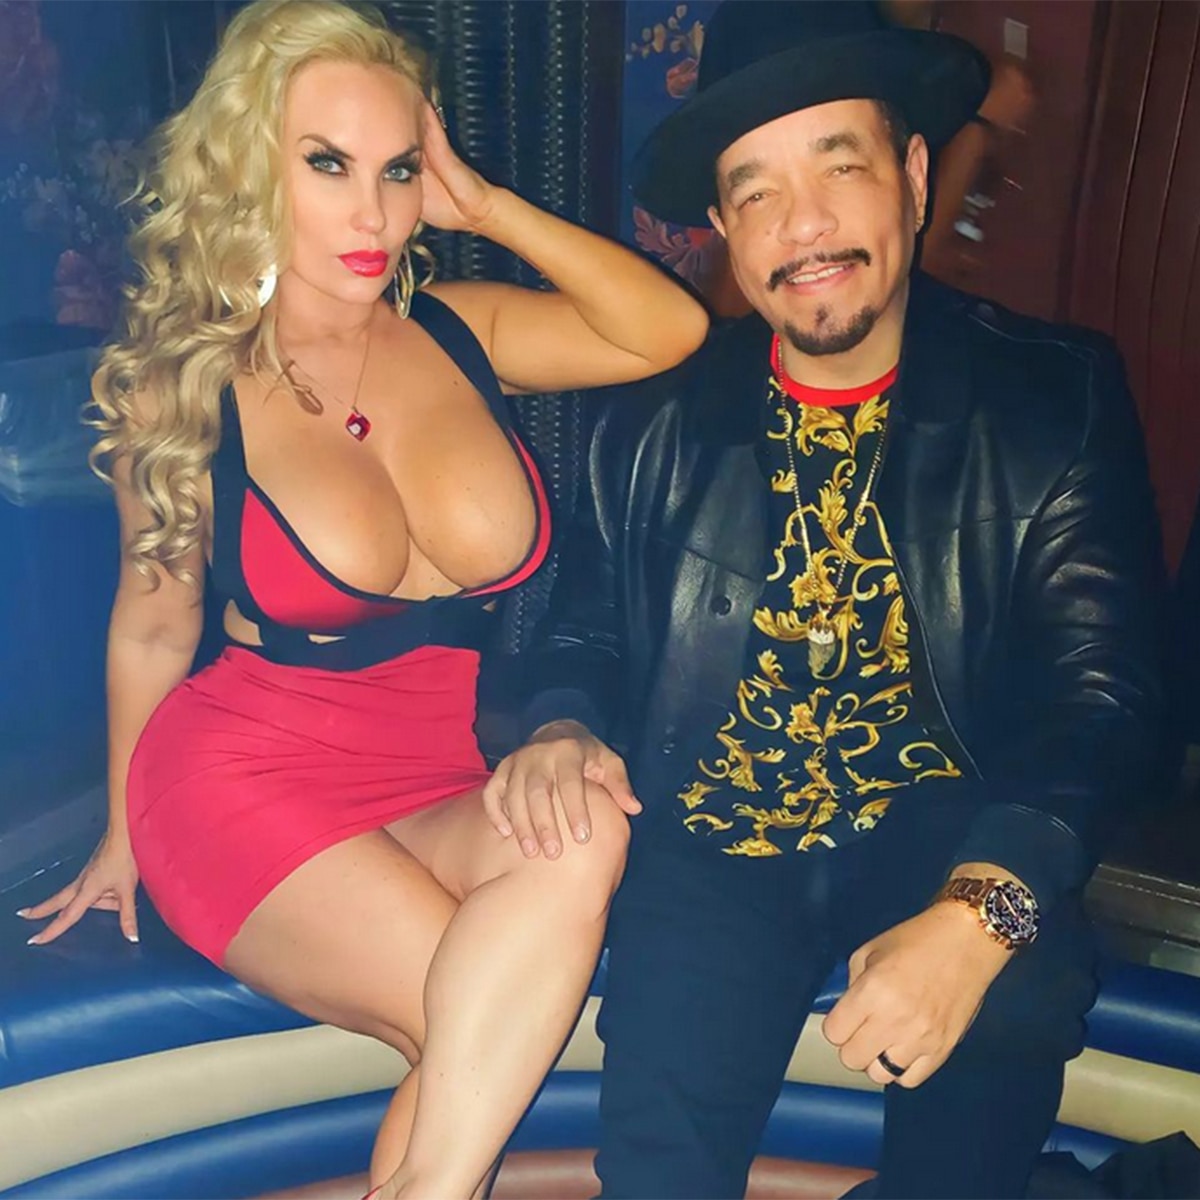 coco ice t girlfriend pic